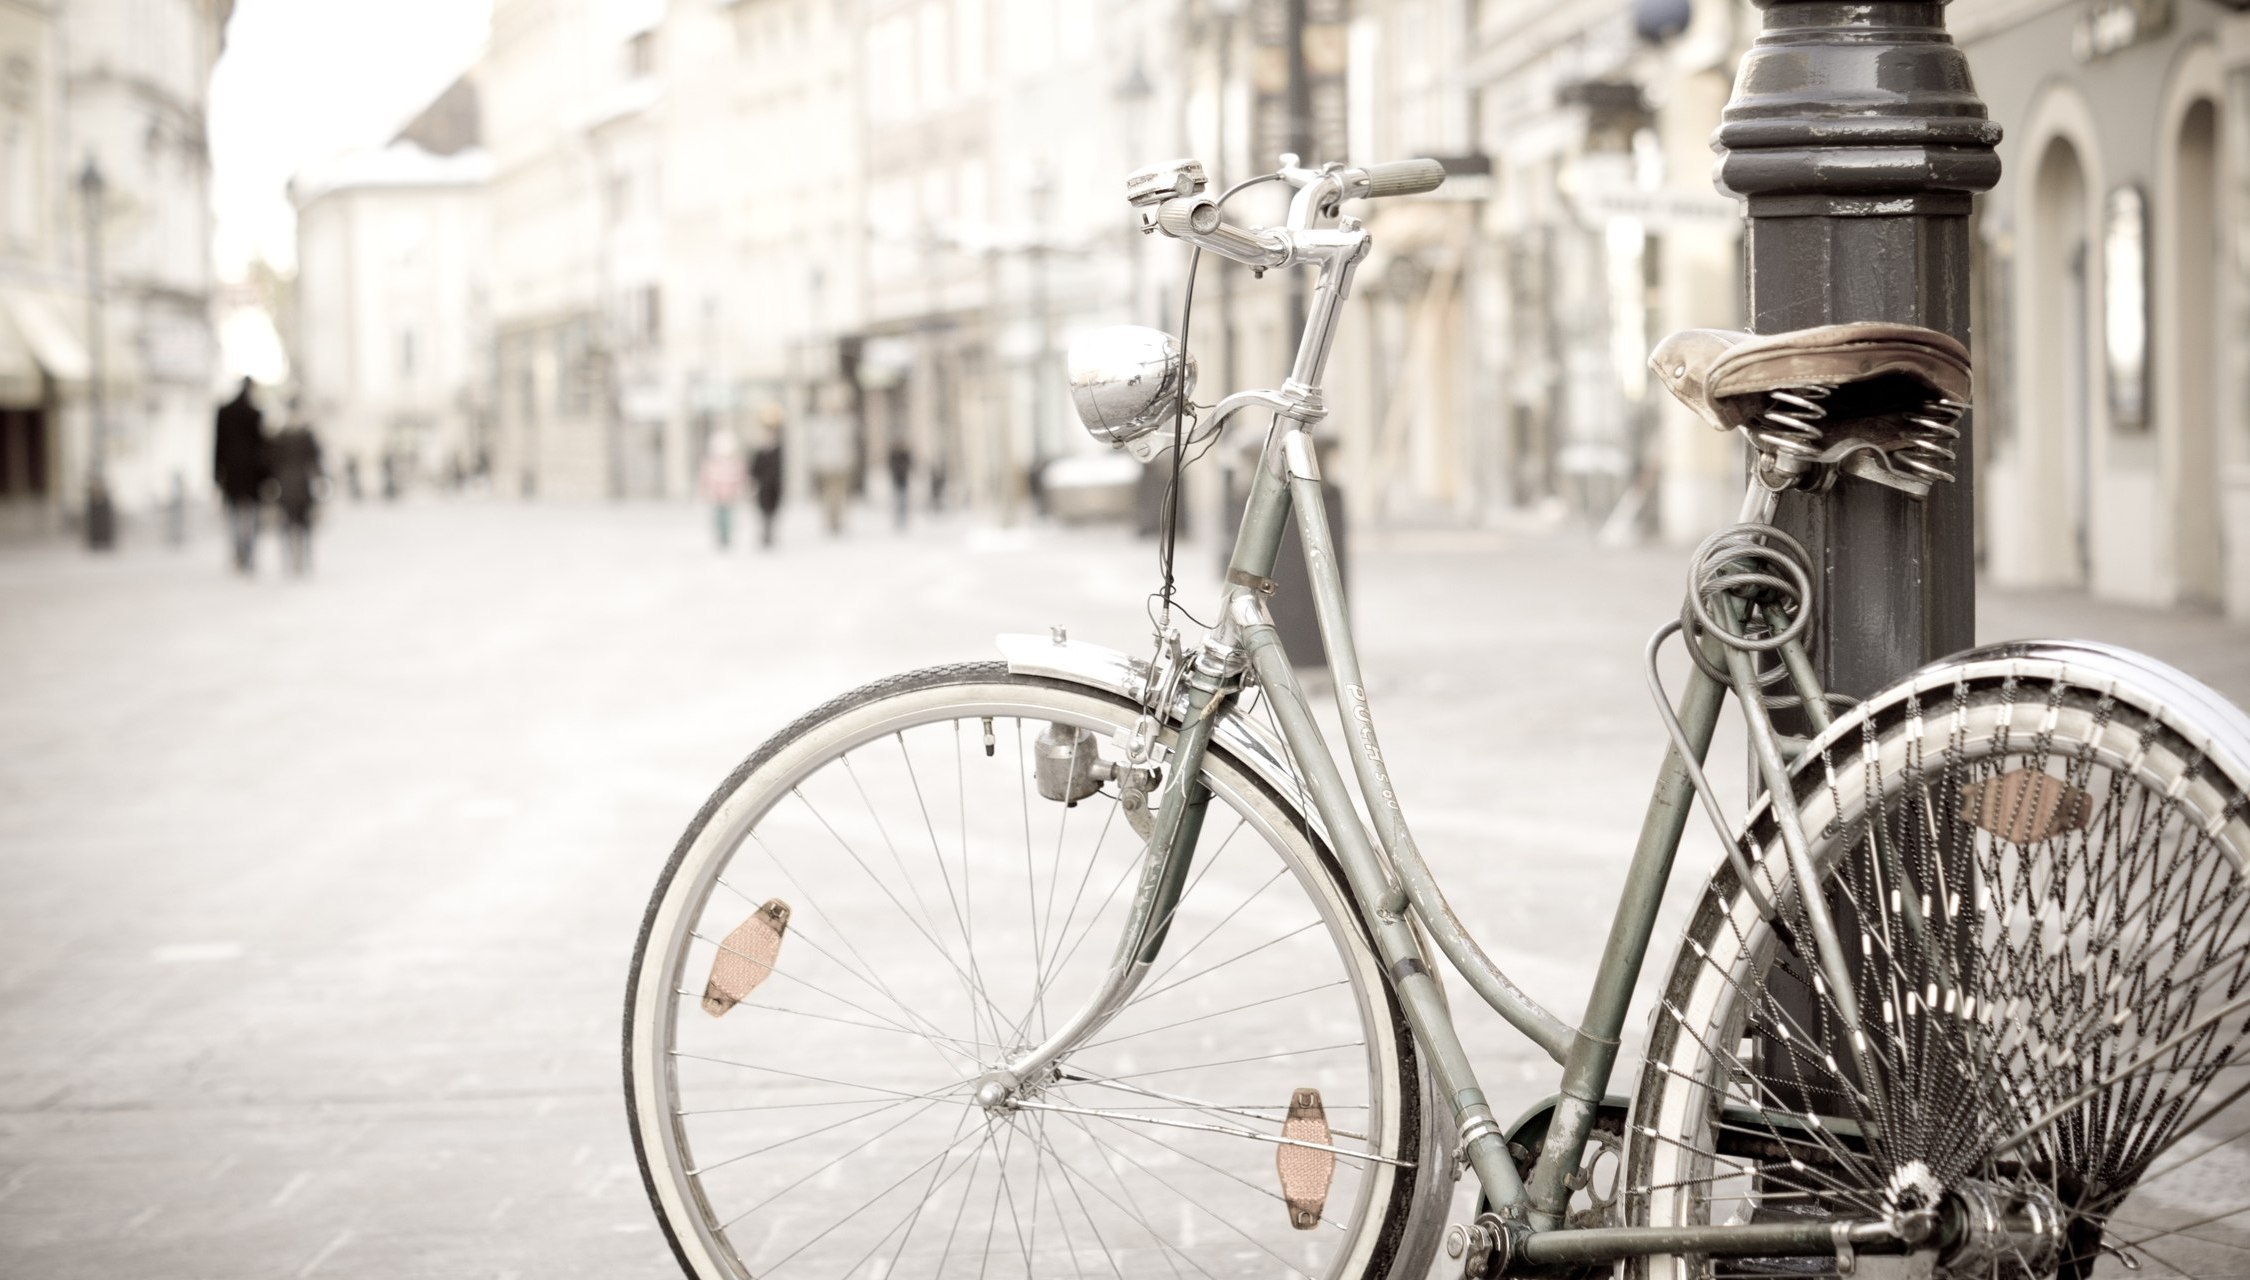 Old Bicycle In The City Center Wallpaper Pu High